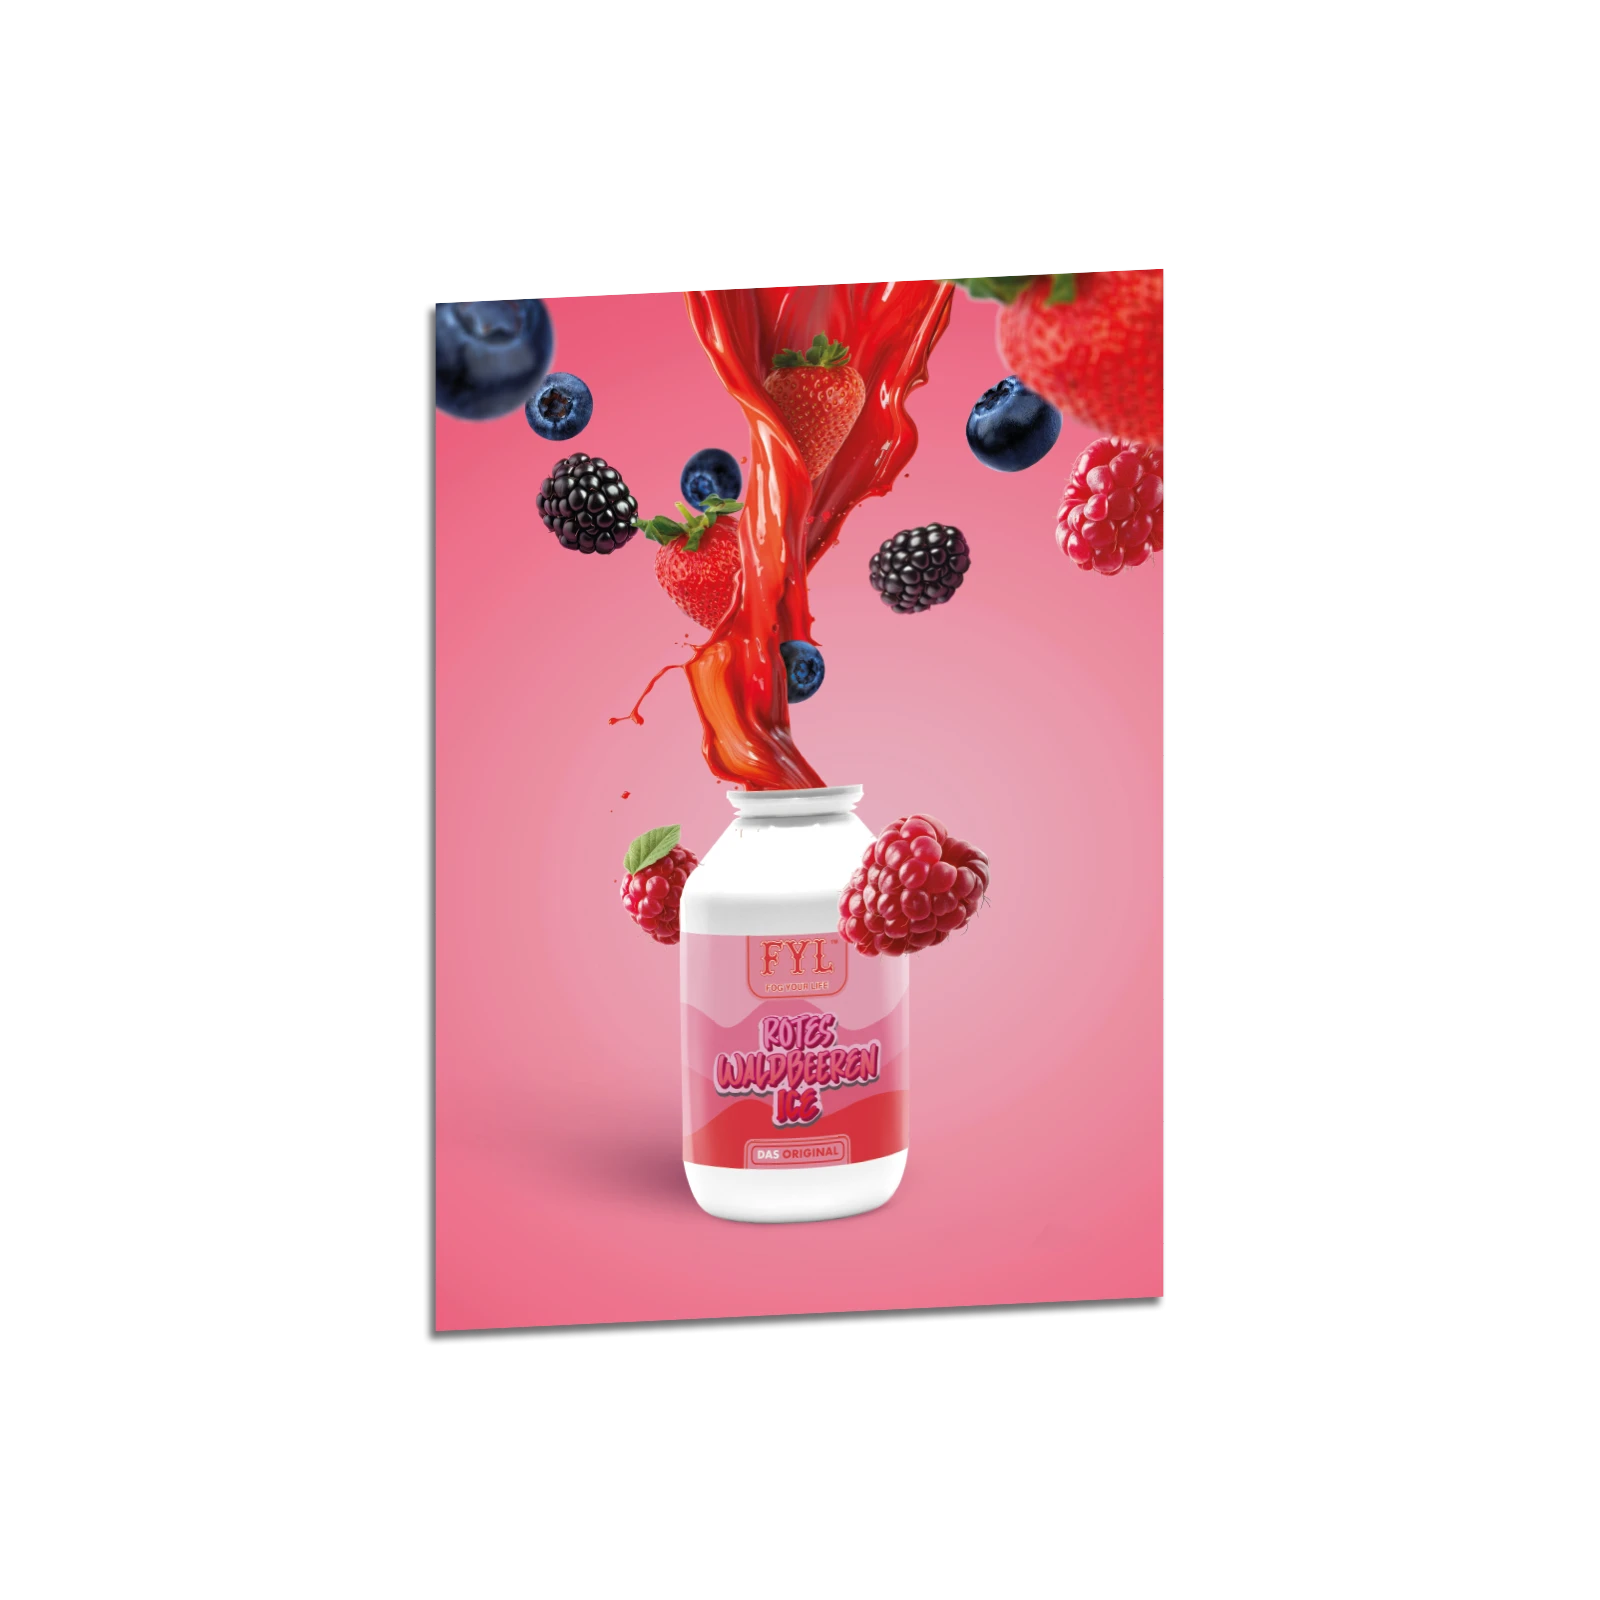 Hookain Poster - A3 - FYL Rotes Waldbeeren Ice